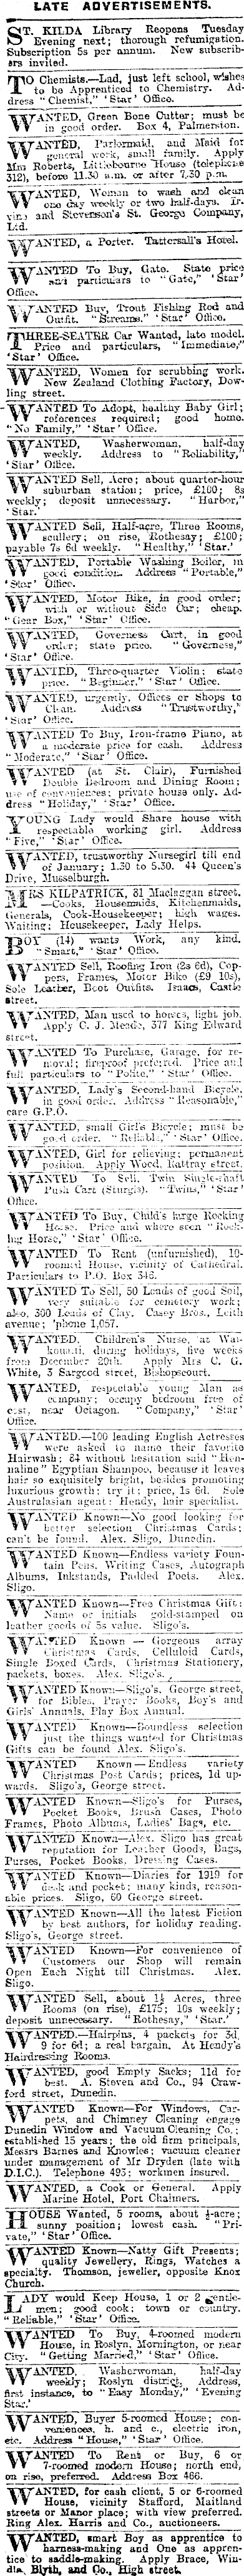 Papers Past | Newspapers | Evening Star | 14 December 1918 | Advertisements Column 1